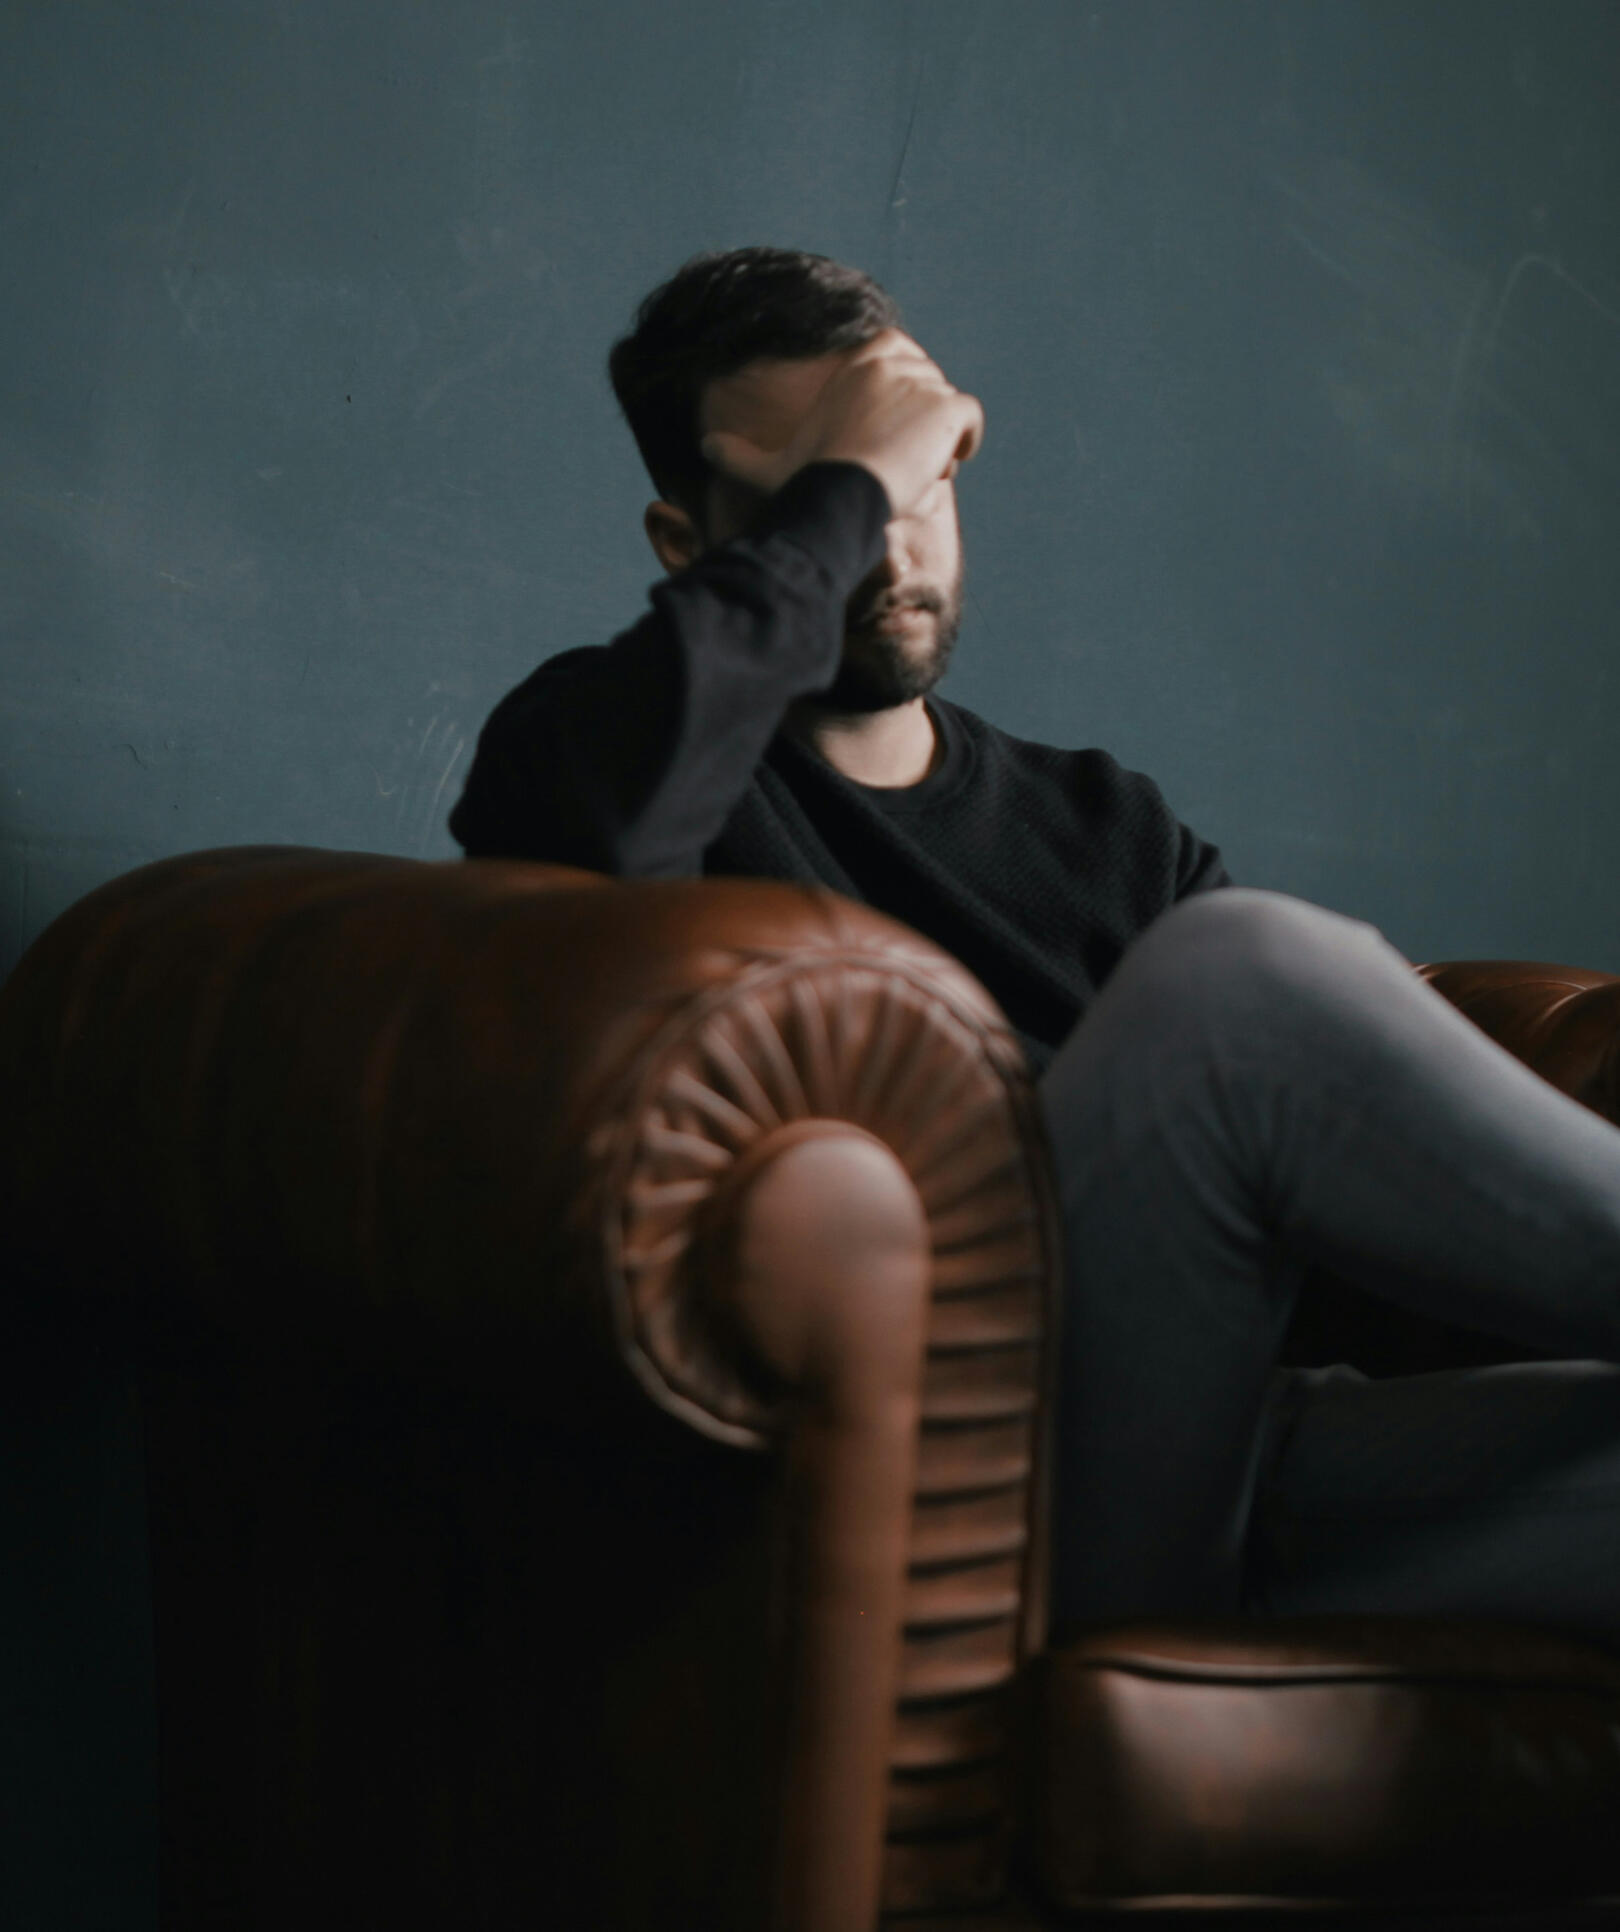 Photo of man holding his head while sitting on a sofa by Nik Shuliahin on Unsplash